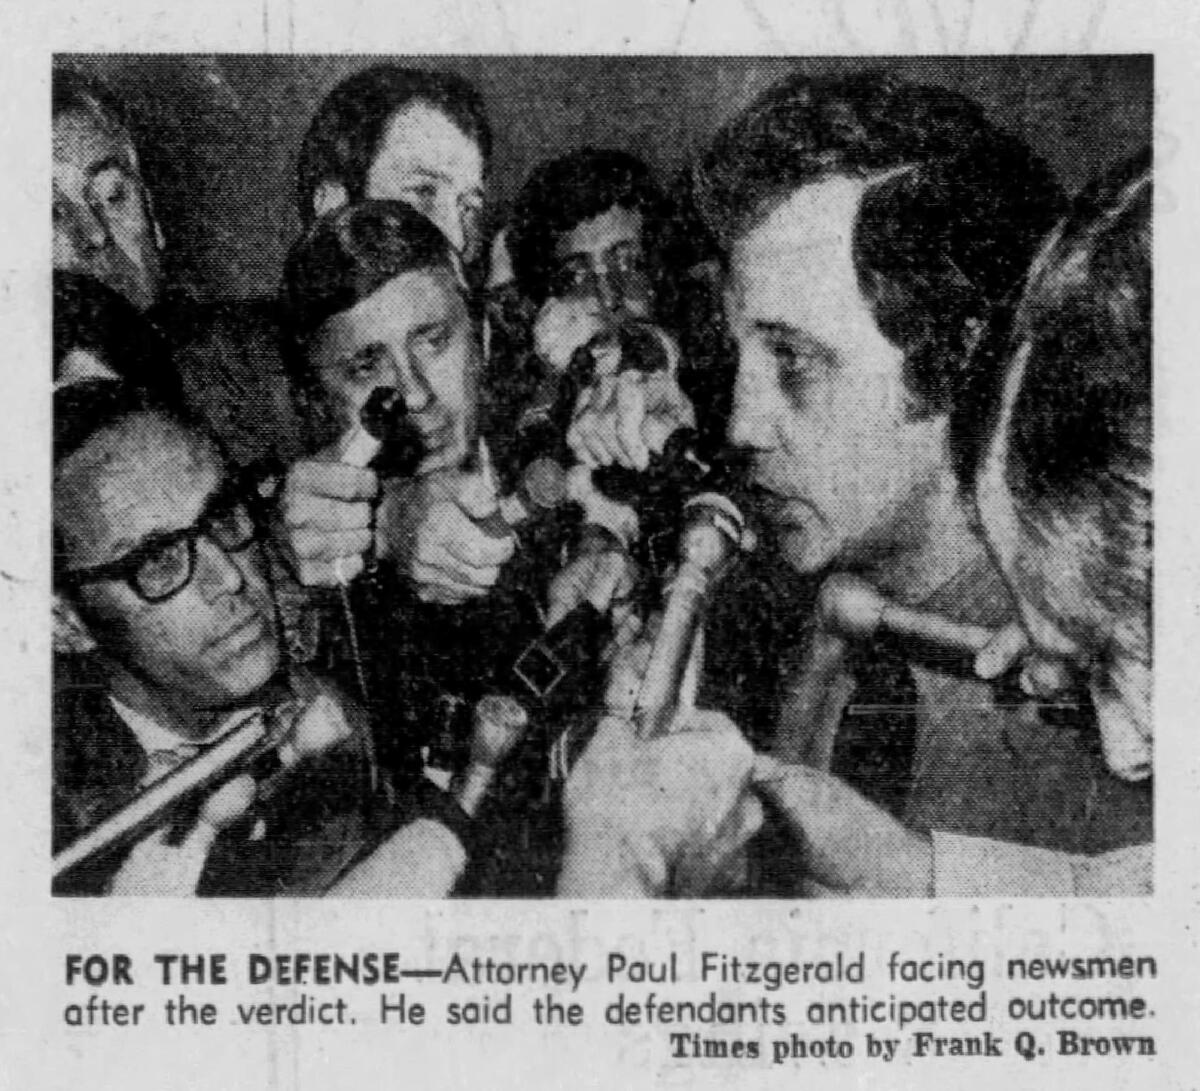 Attorney Paul Fitzgerald after the Manson verdict